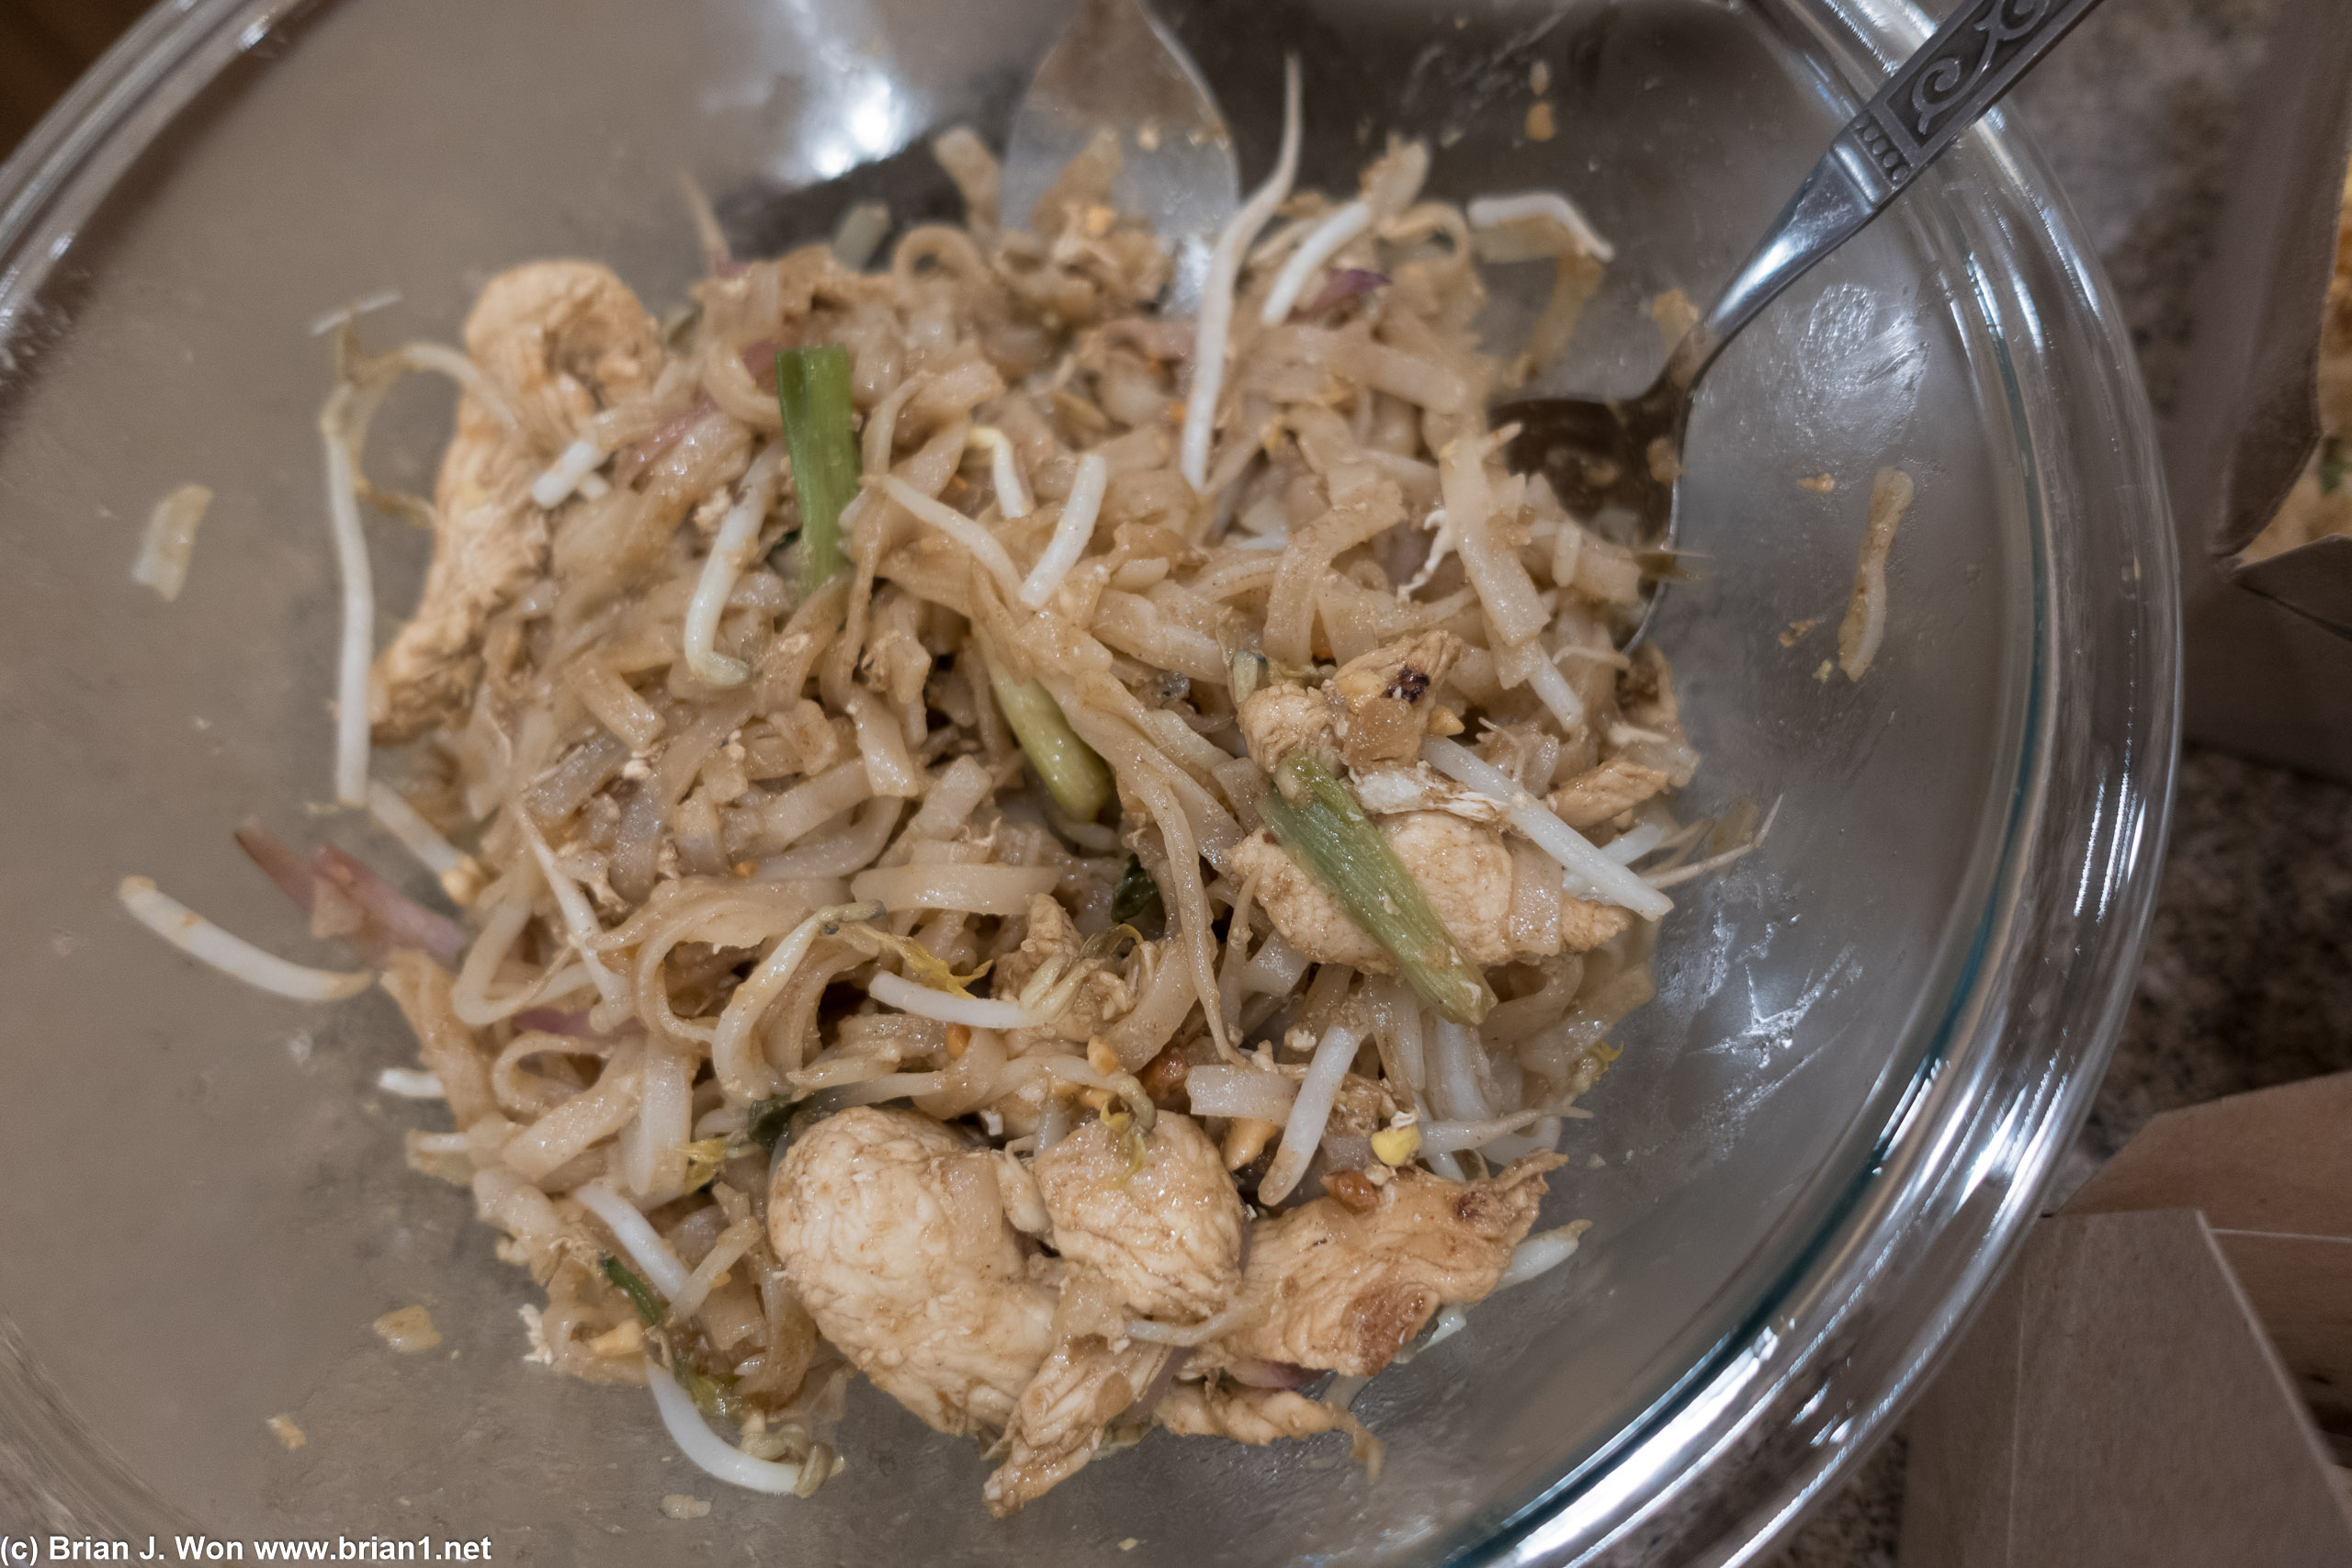 Pad thai with chicken wasn't bad.